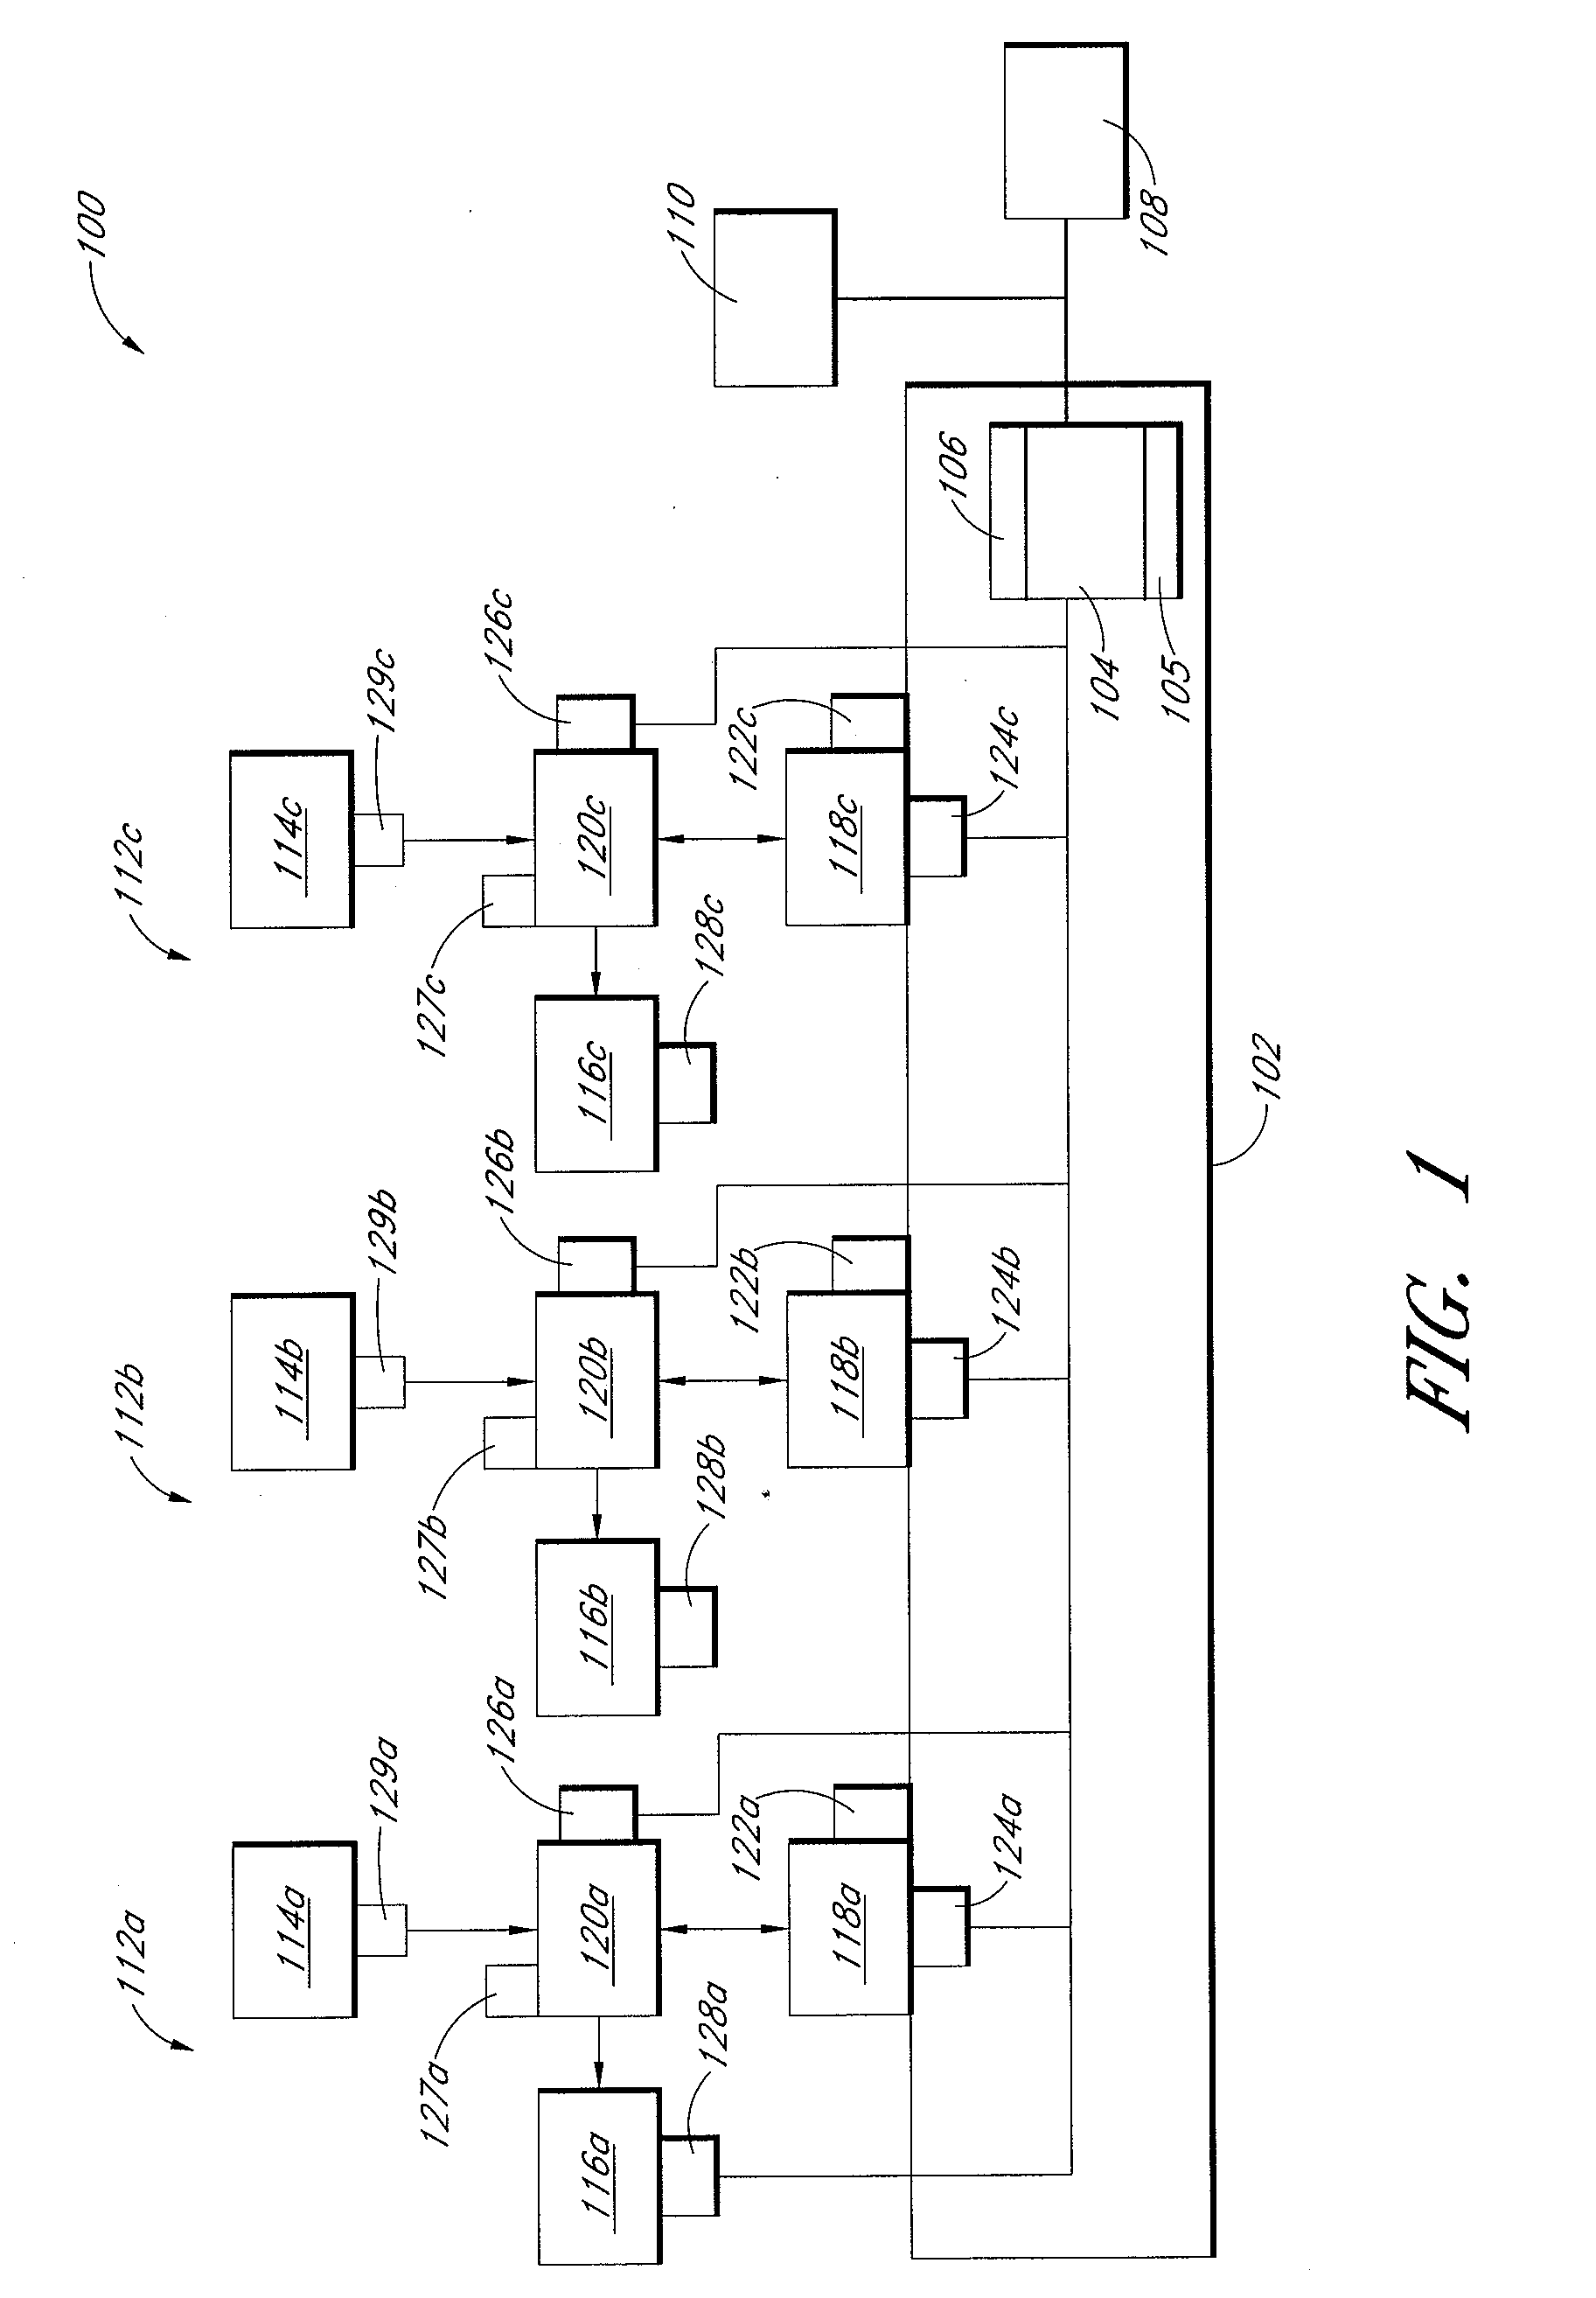 Fluid transfer devices and methods of use